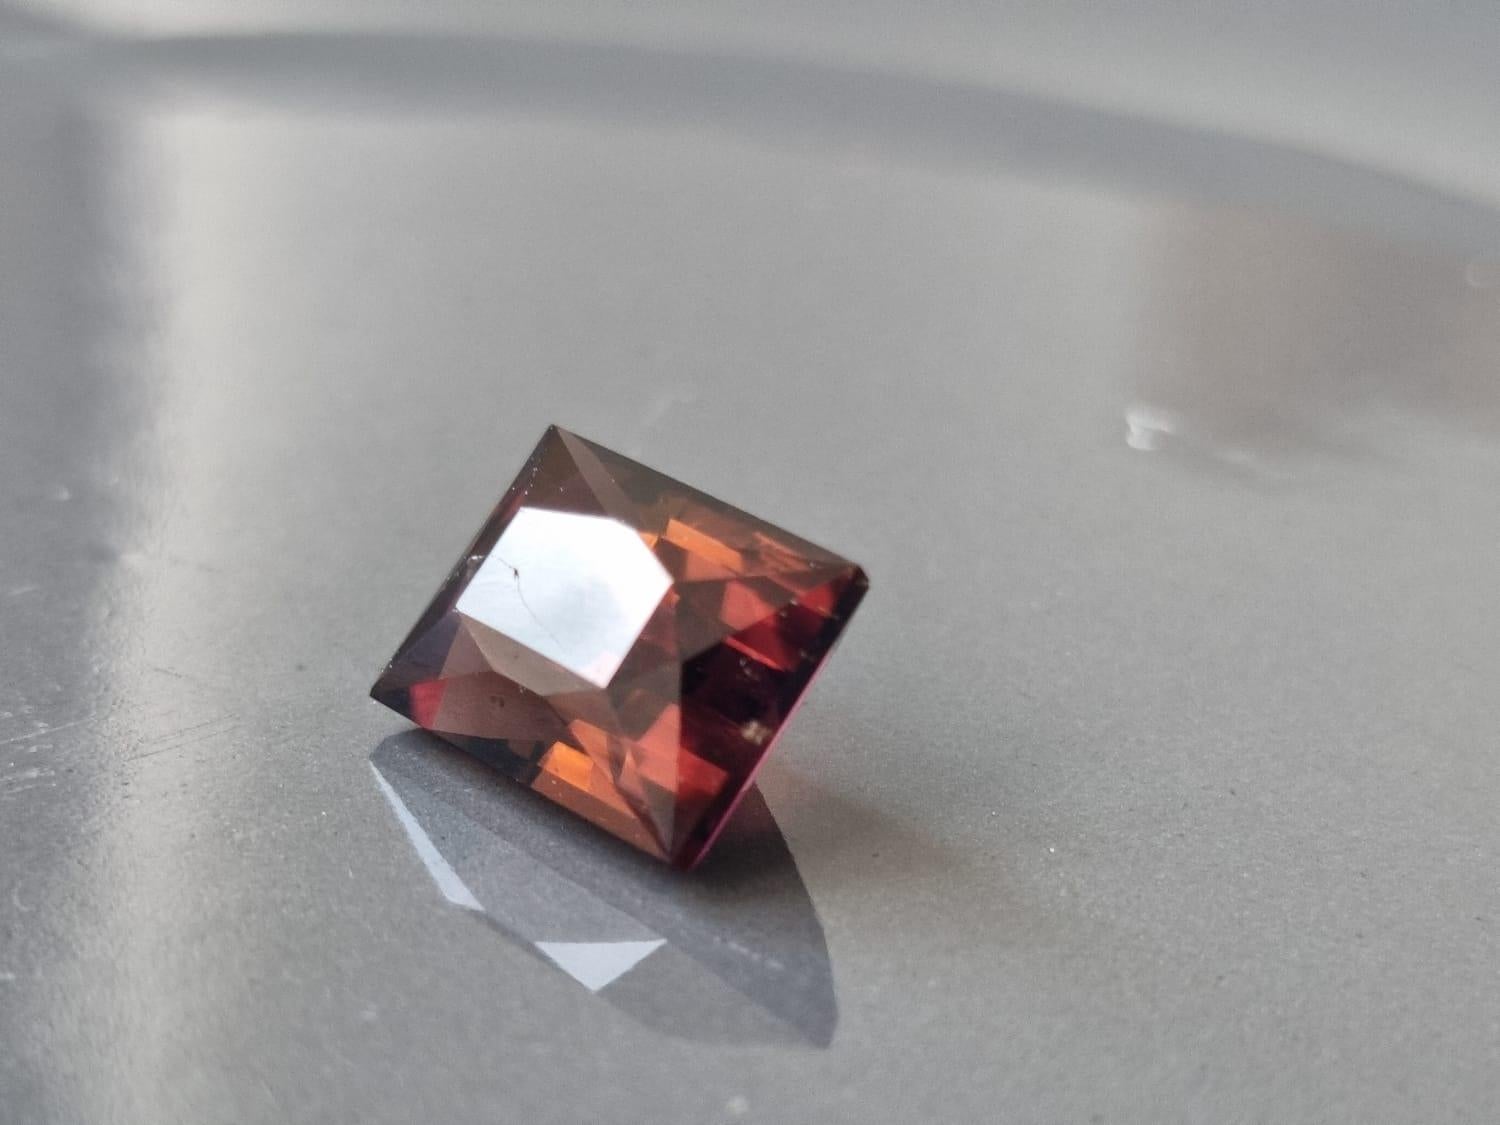 Unearth the natural beauty of this 6.08-carat Square Cut Tourmaline, a unique and enchanting gemstone now available exclusively on this Marketplace. With its captivating pink and earth tones, square-cut elegance, this gem promises to be the focal